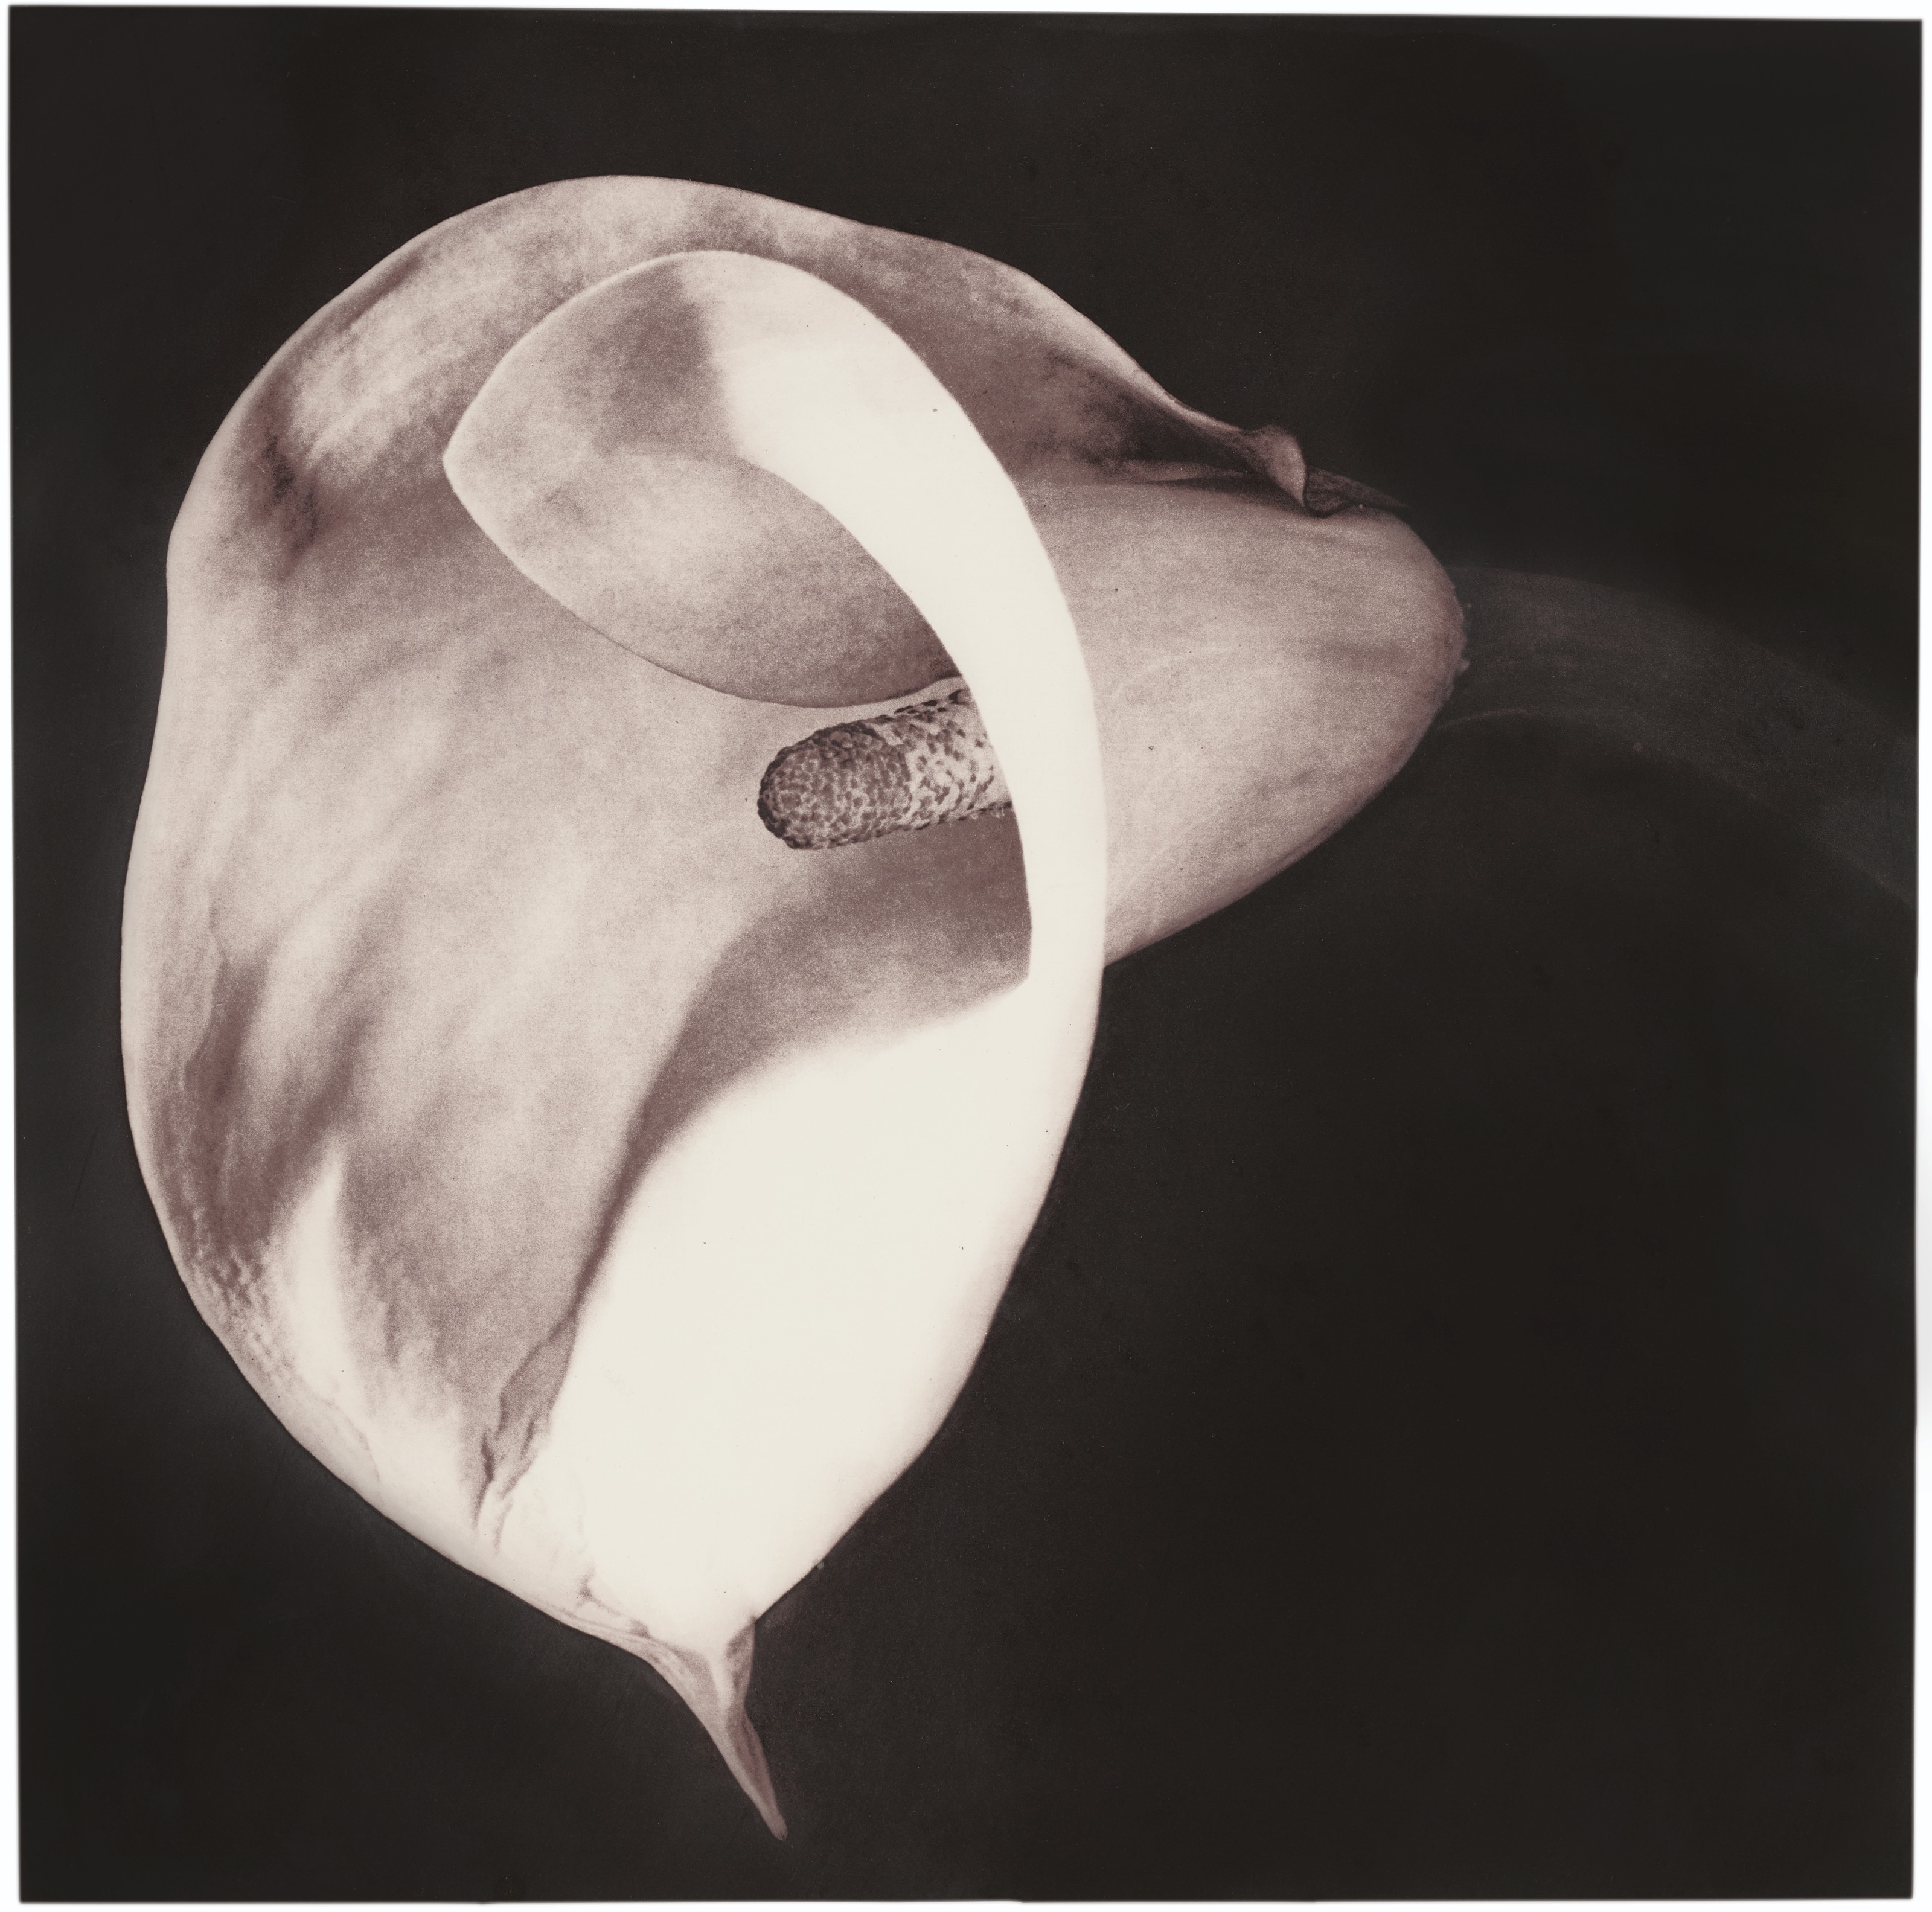 Calla Lily by Robert Mapplethorpe, 1987, 1988